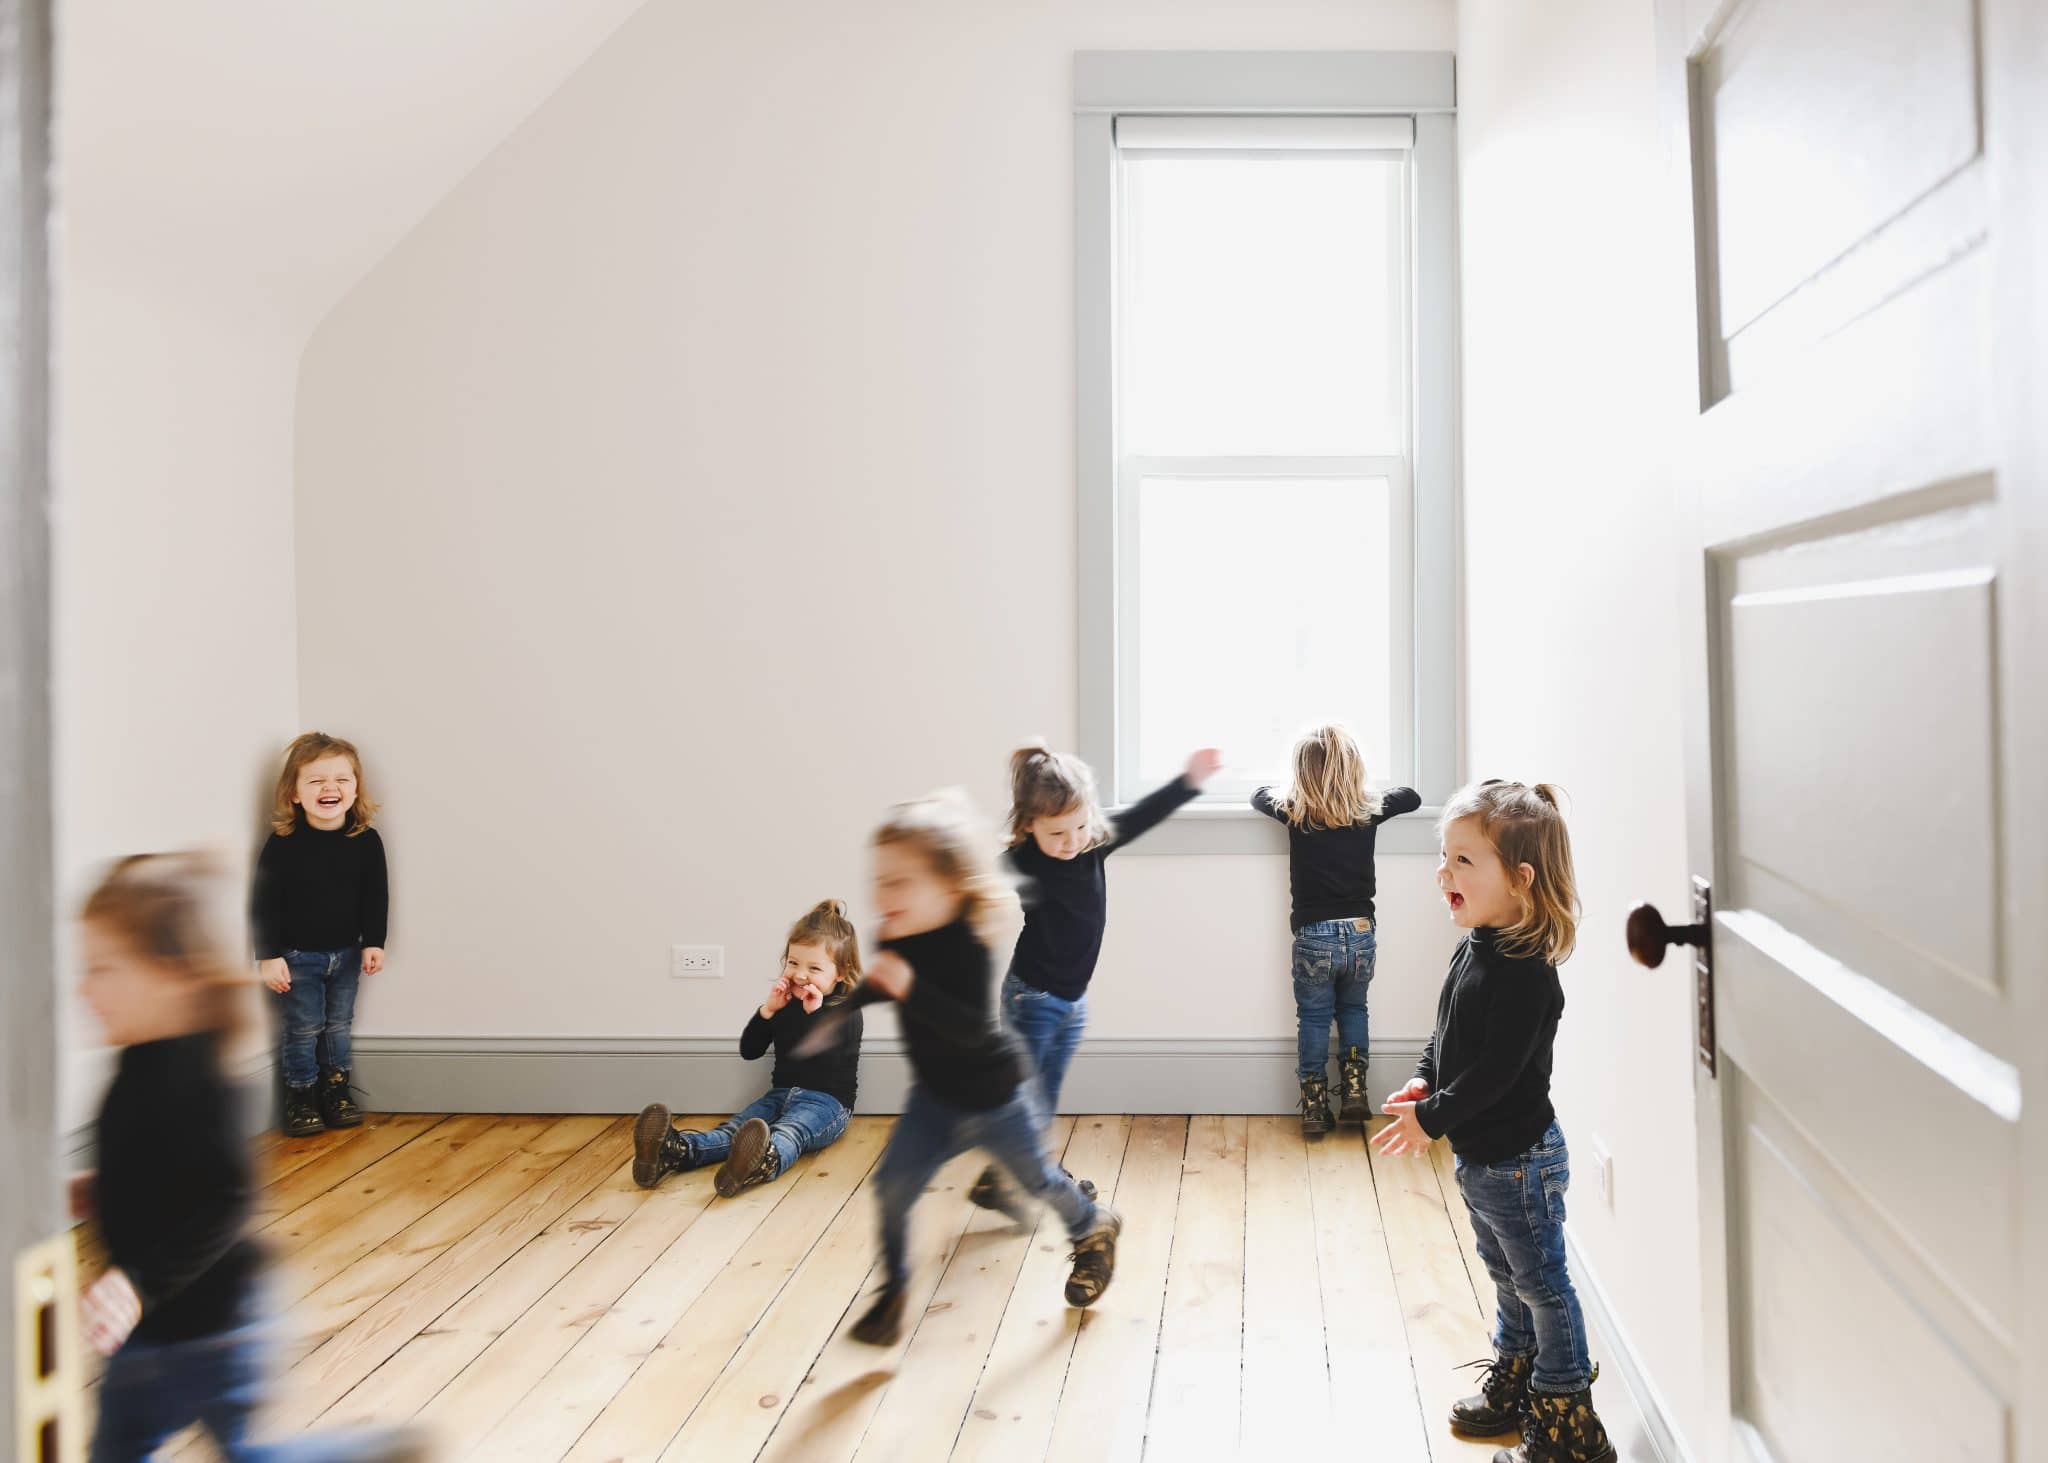 A composite photo of 7 Lucys in the Two Flat | creating a composite photo, via Yellow Brick Home